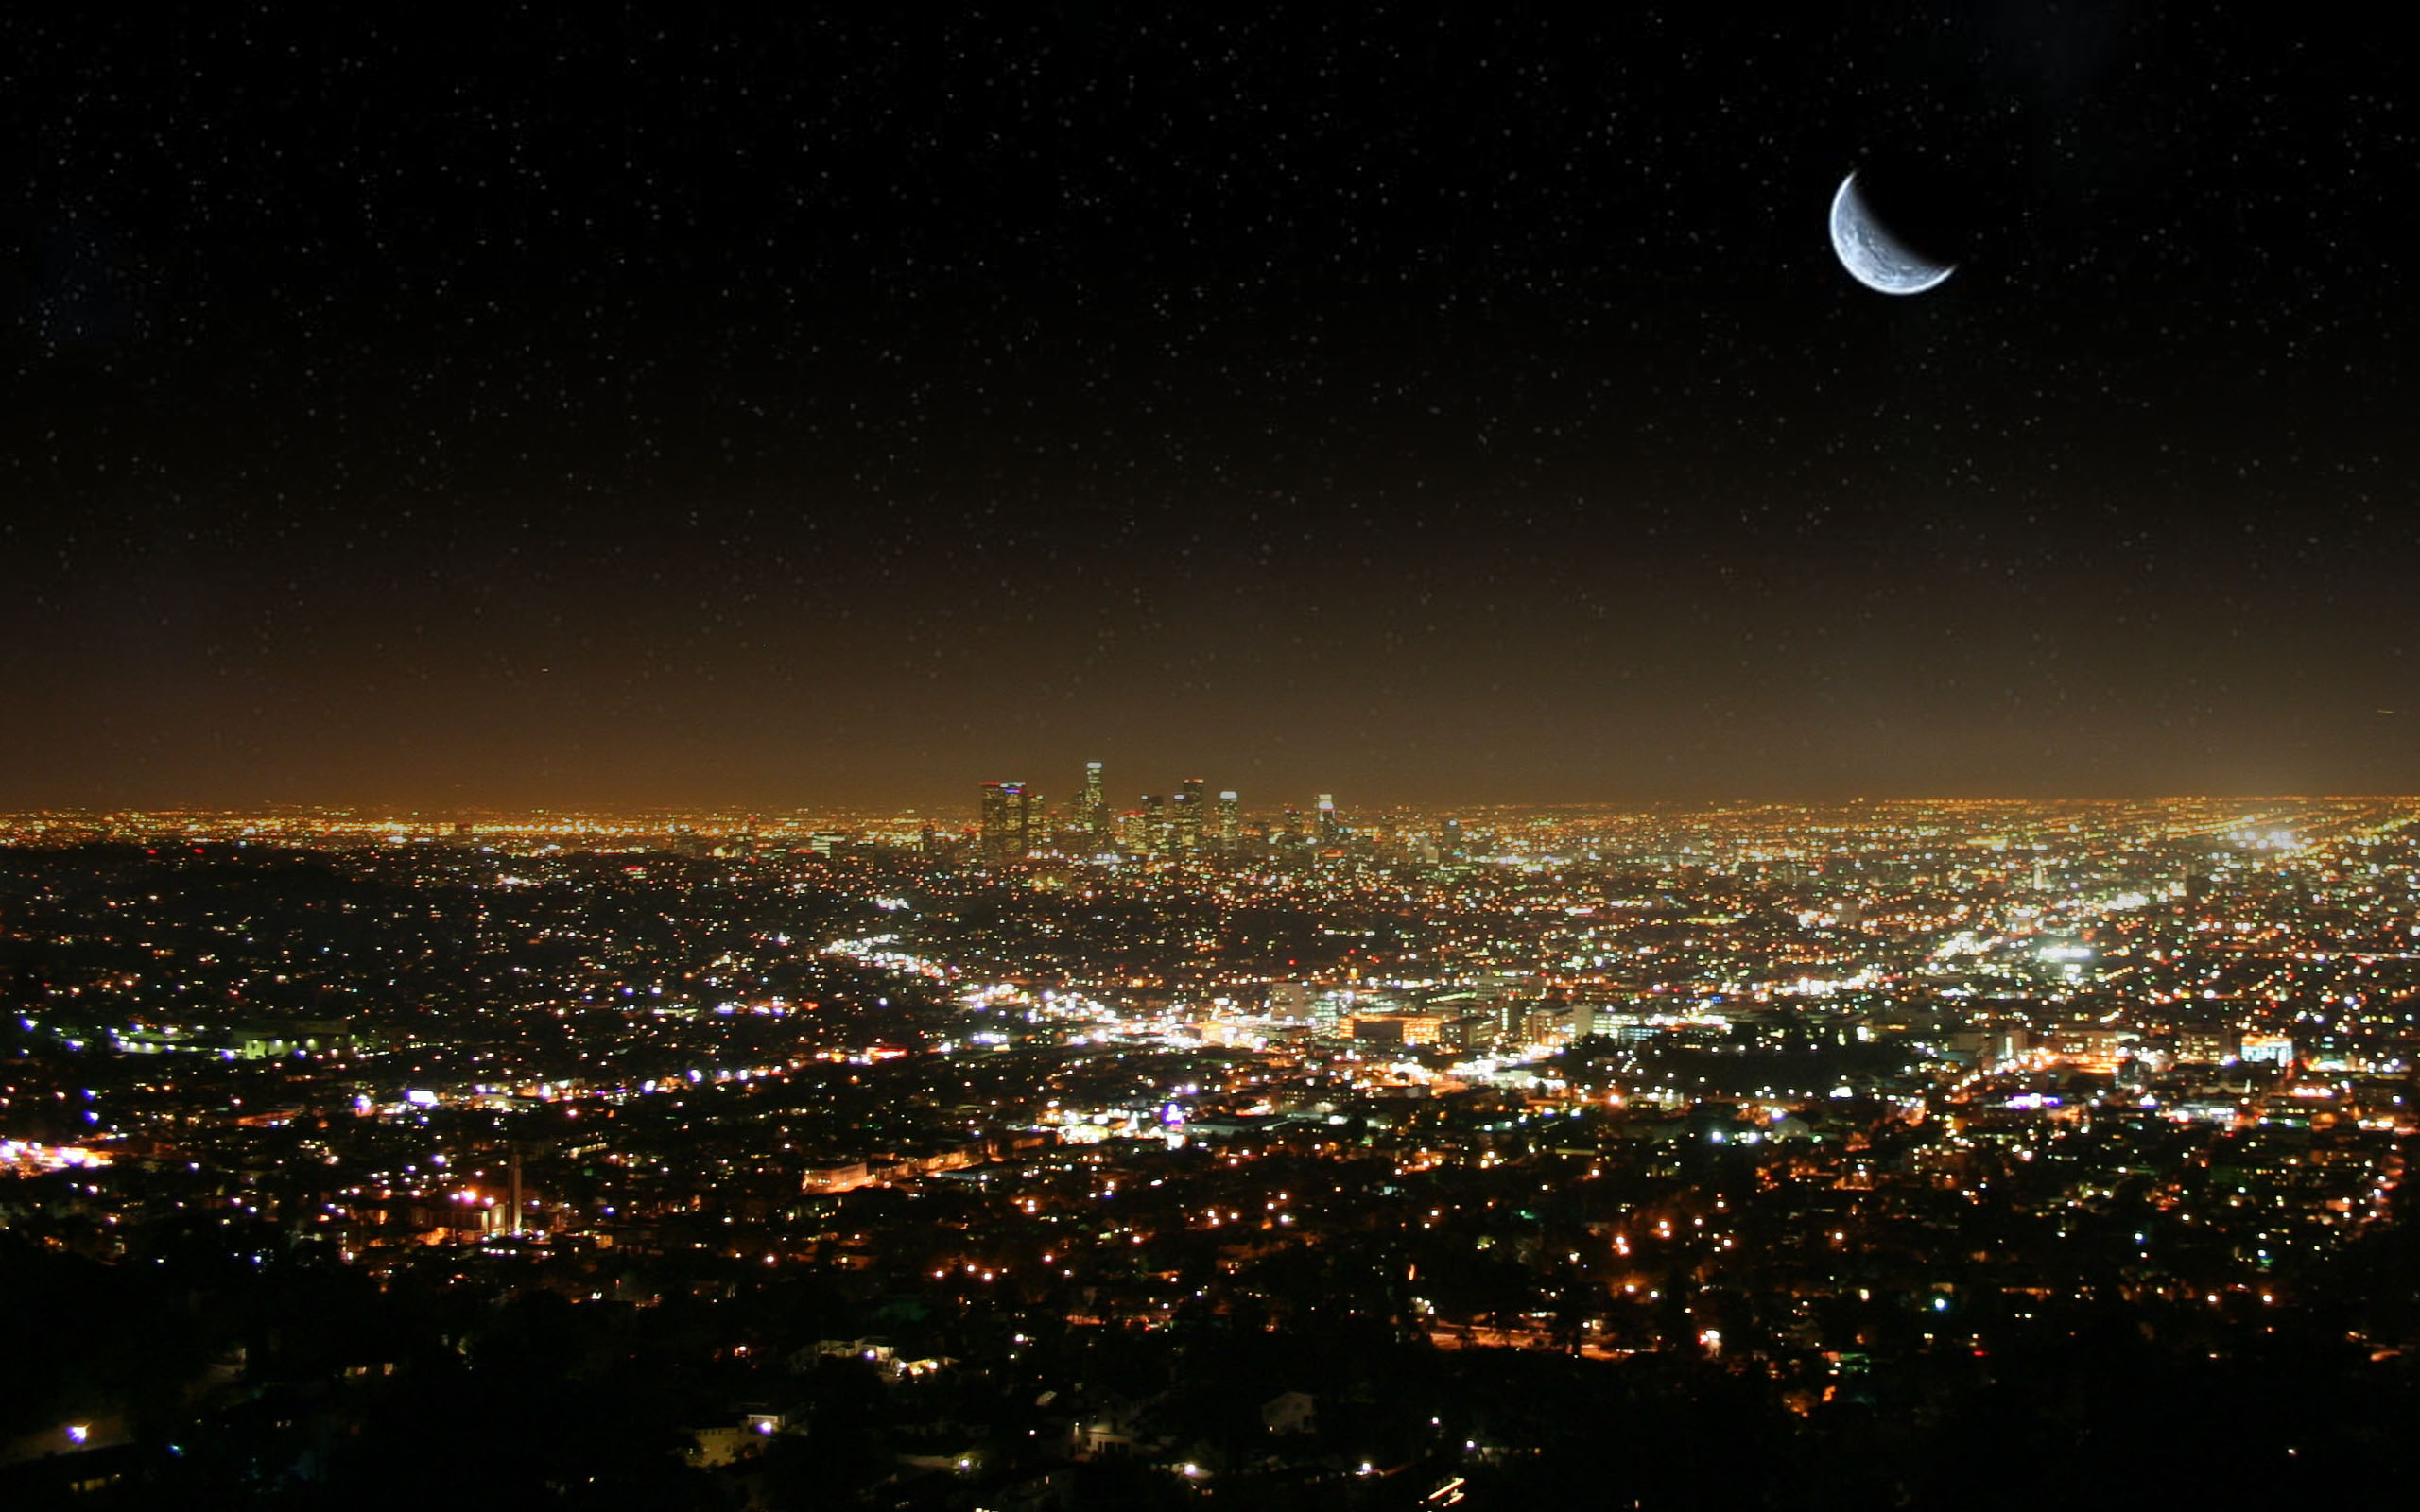 High Definition Los Angeles Wallpaper Image In 3d For